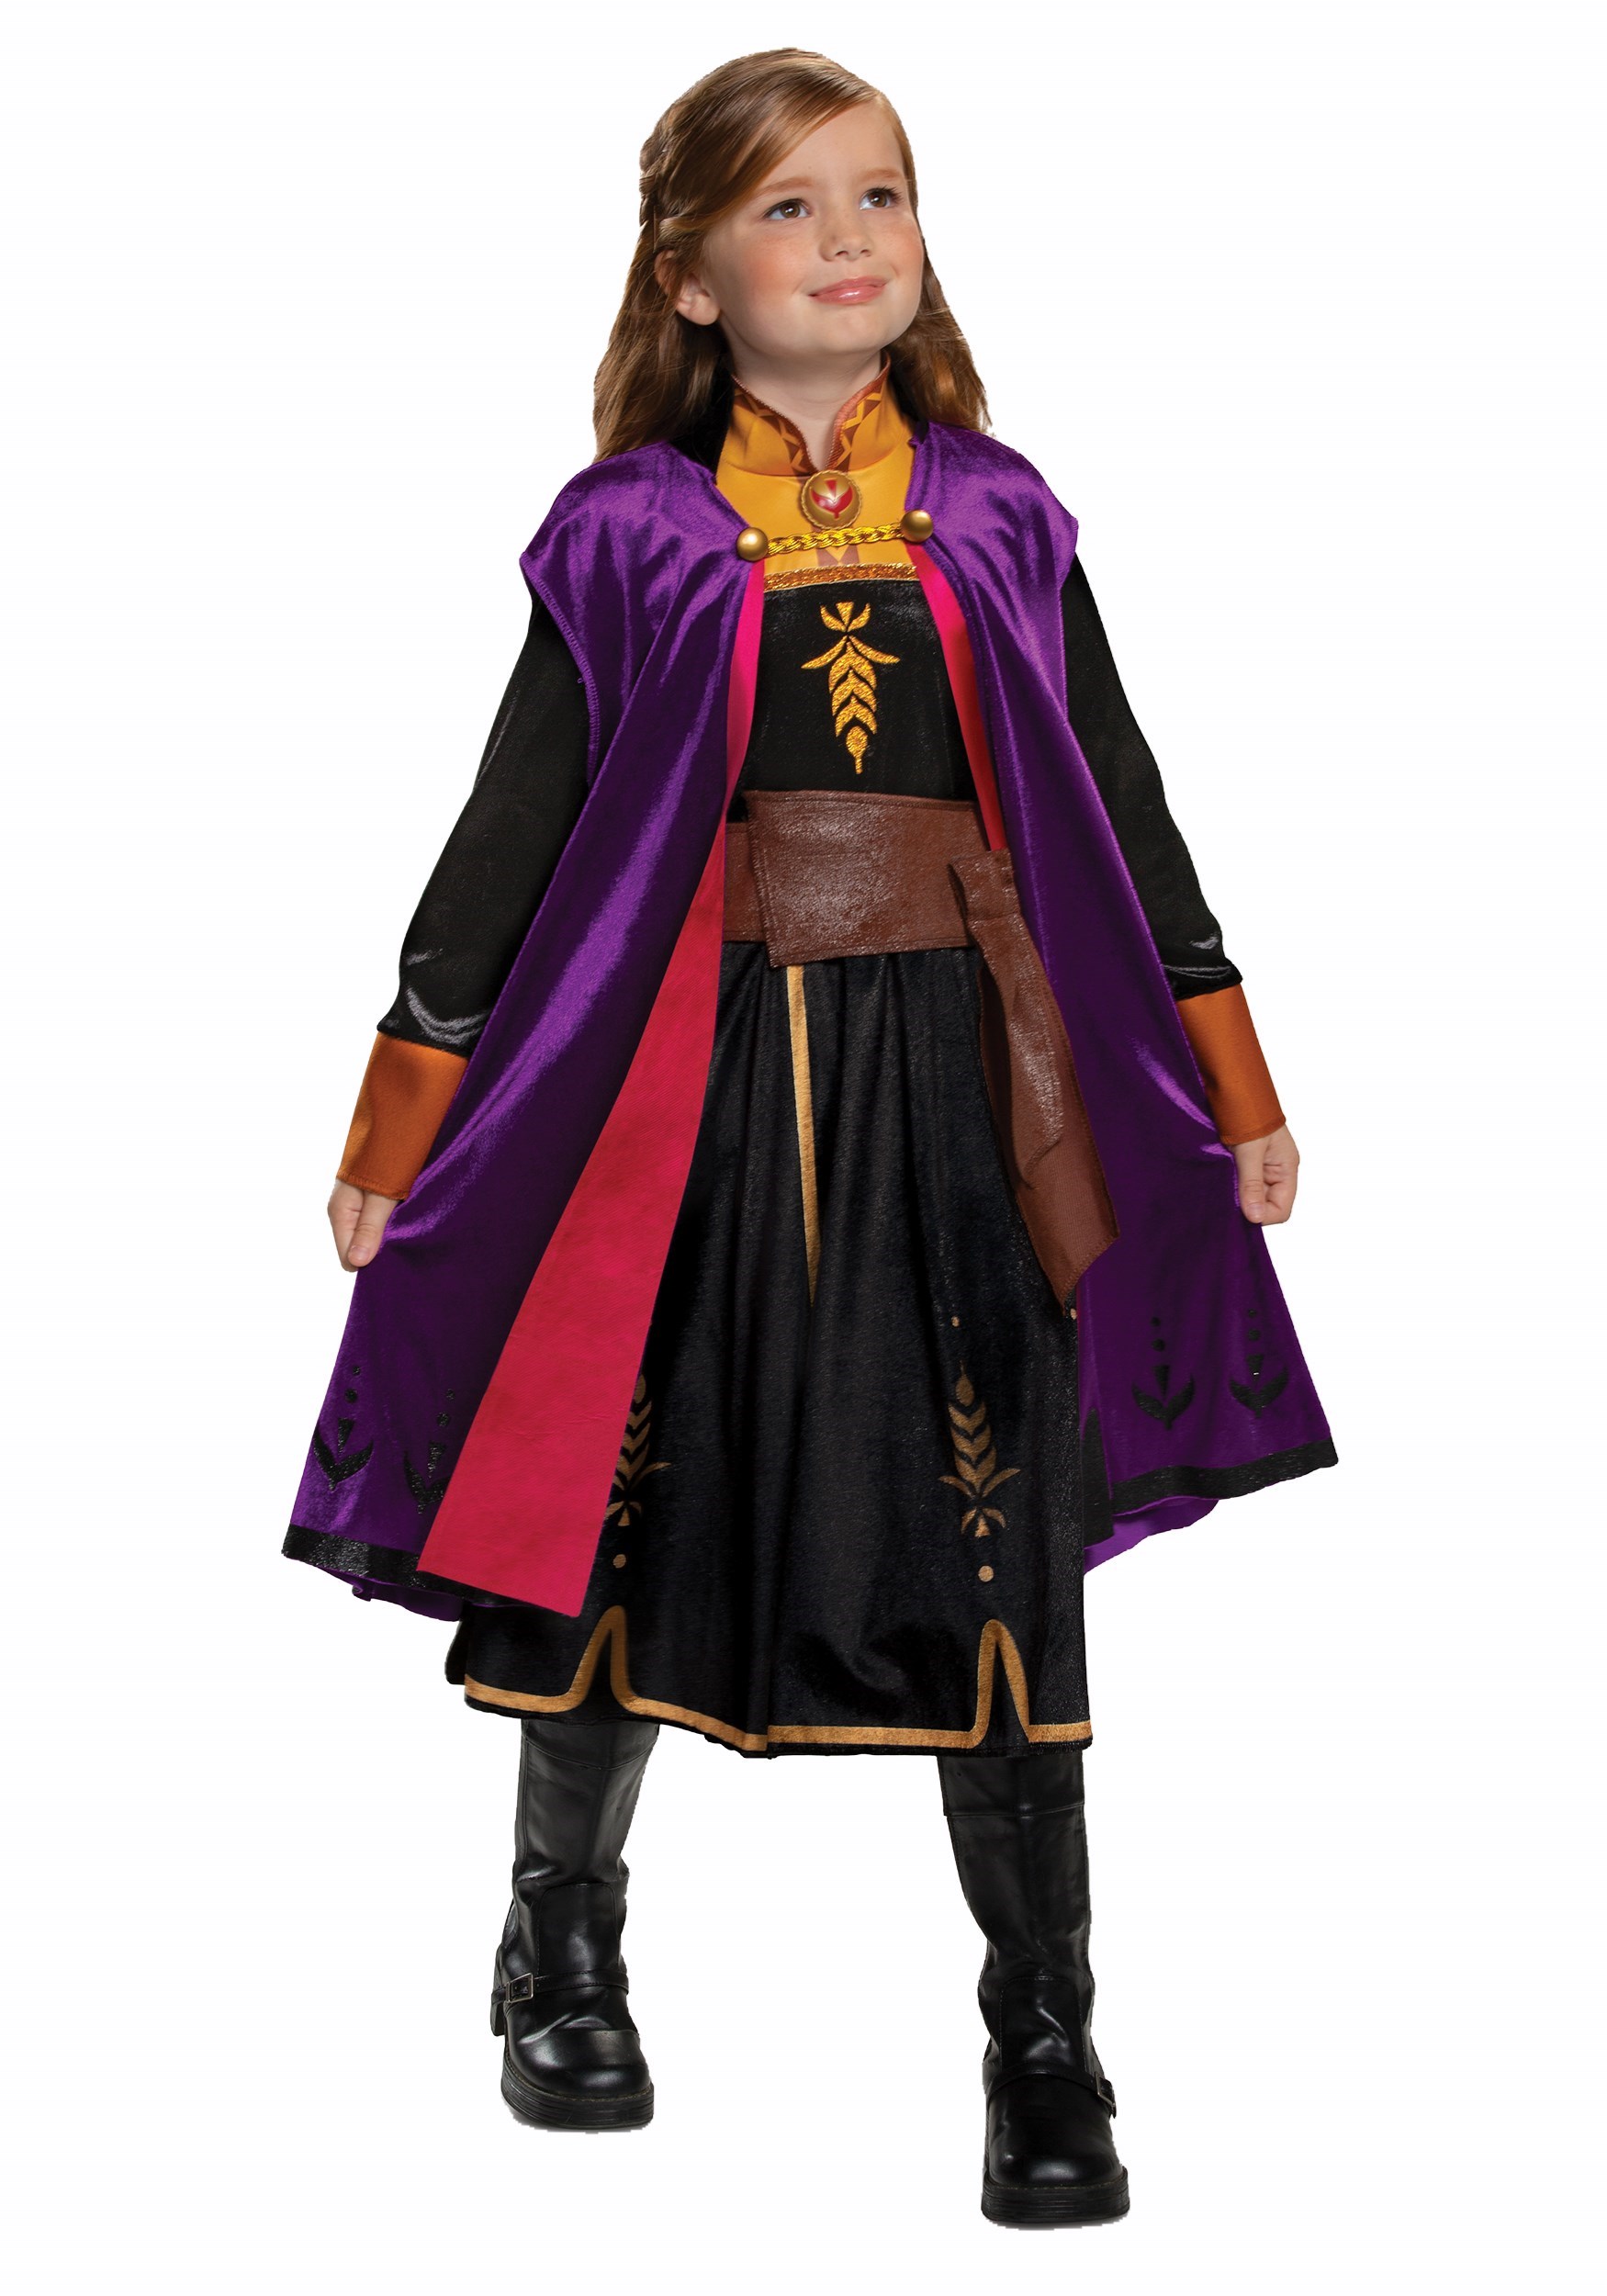 Photos - Fancy Dress Deluxe Disguise  Frozen 2 Anna Costume for Girls | Princess Costumes for Gi 